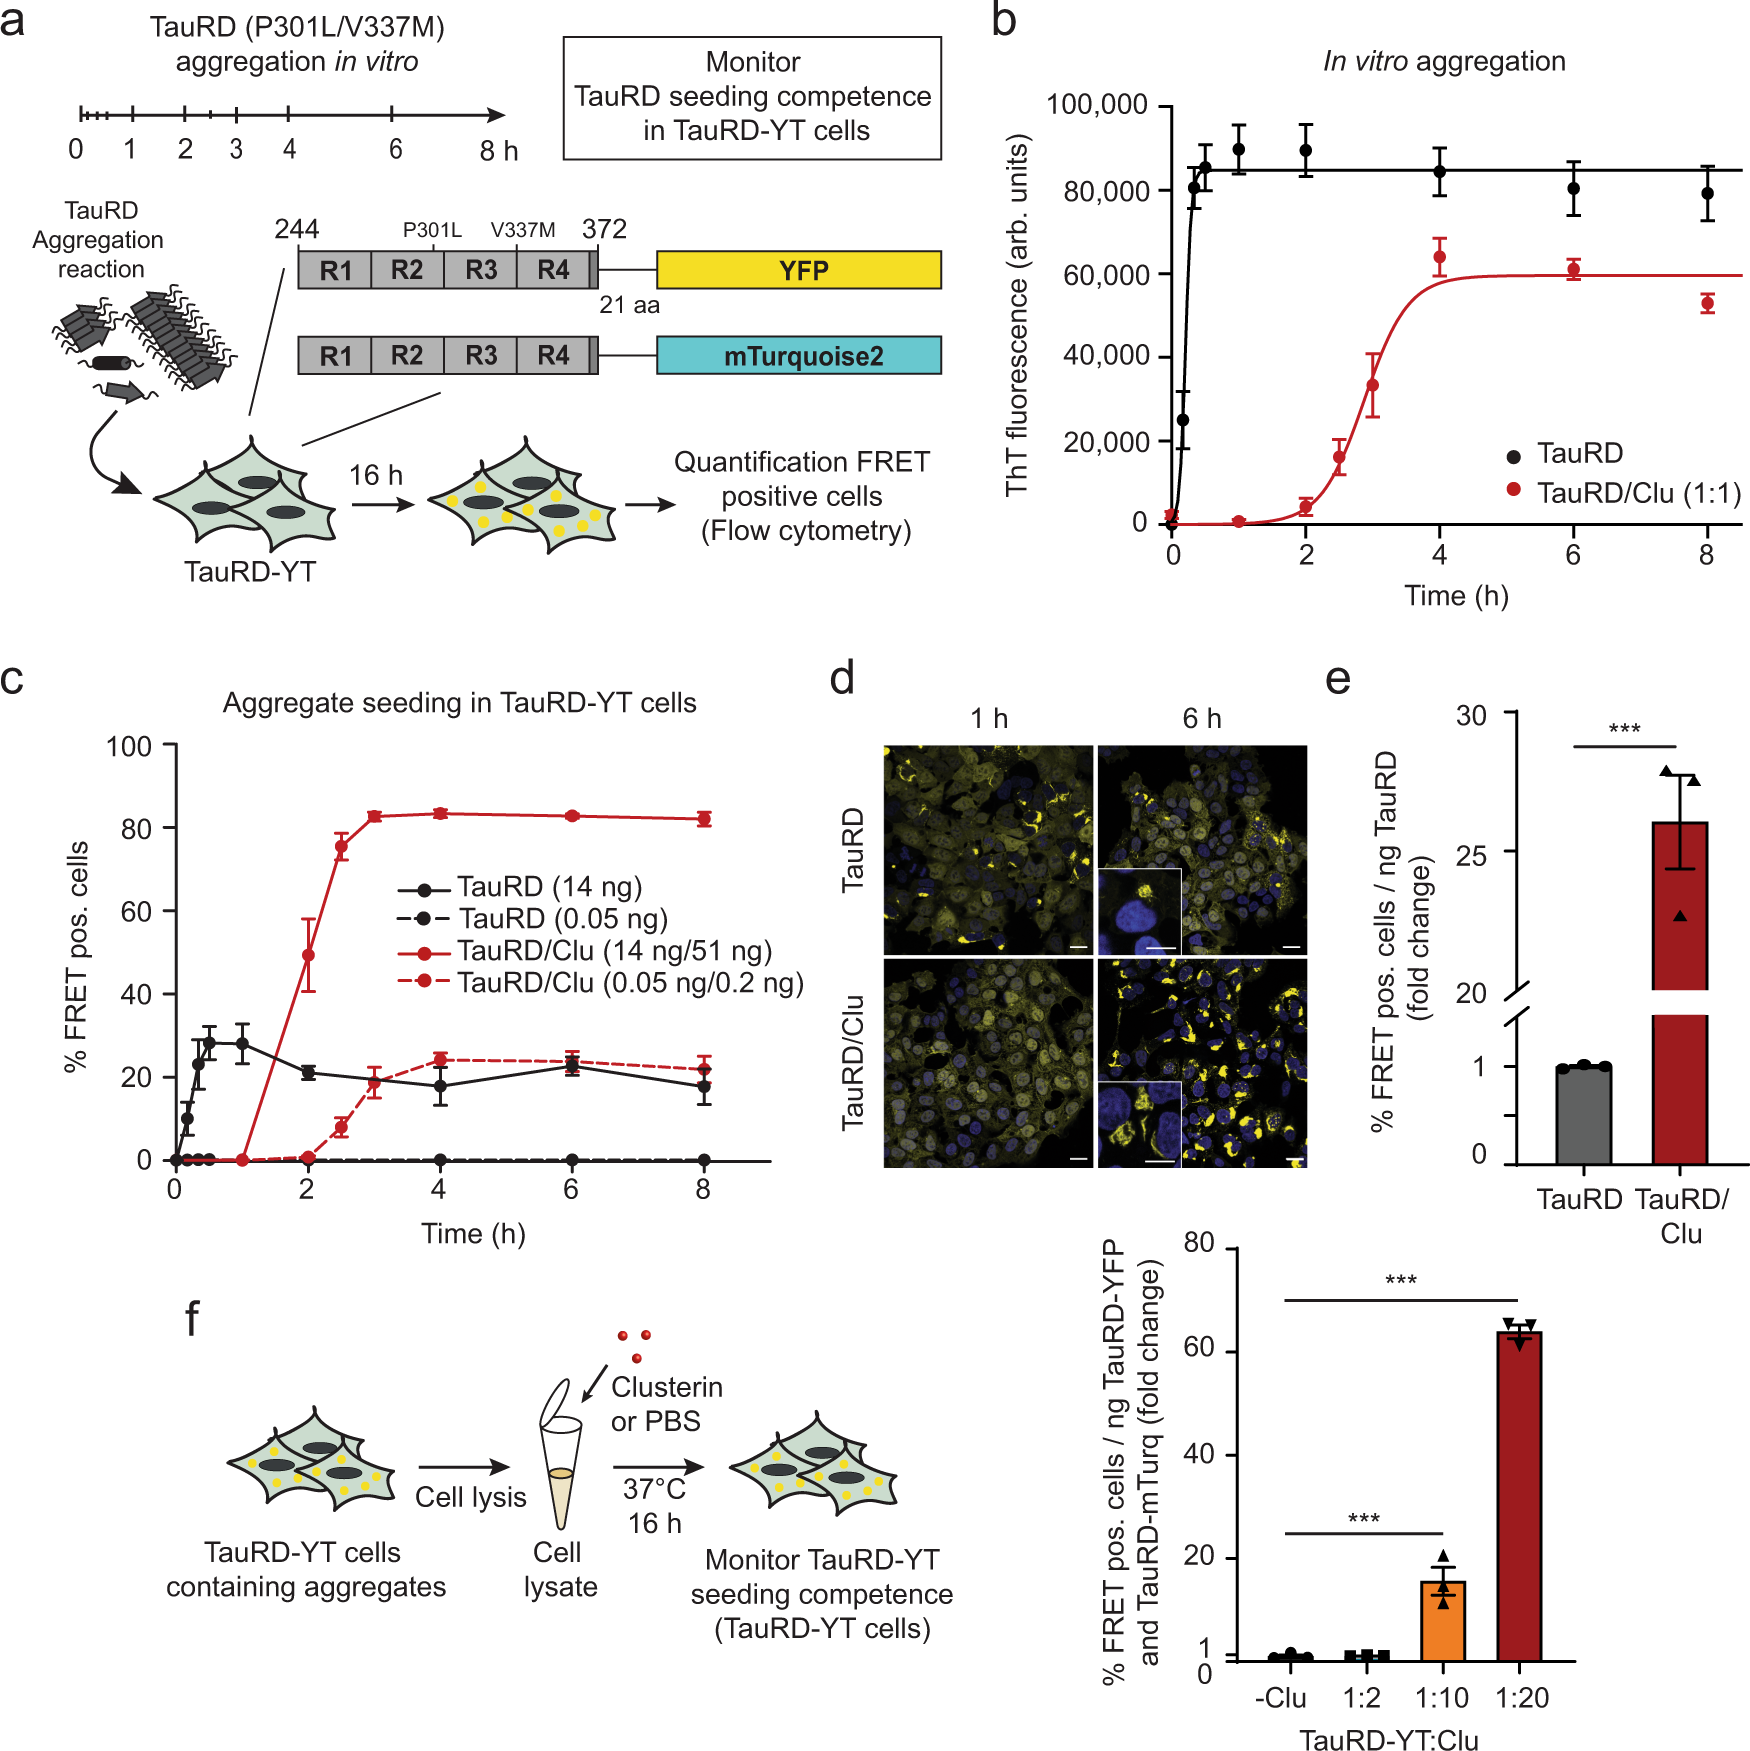 The extracellular chaperone Clusterin enhances Tau aggregate seeding in a  cellular model | Nature Communications